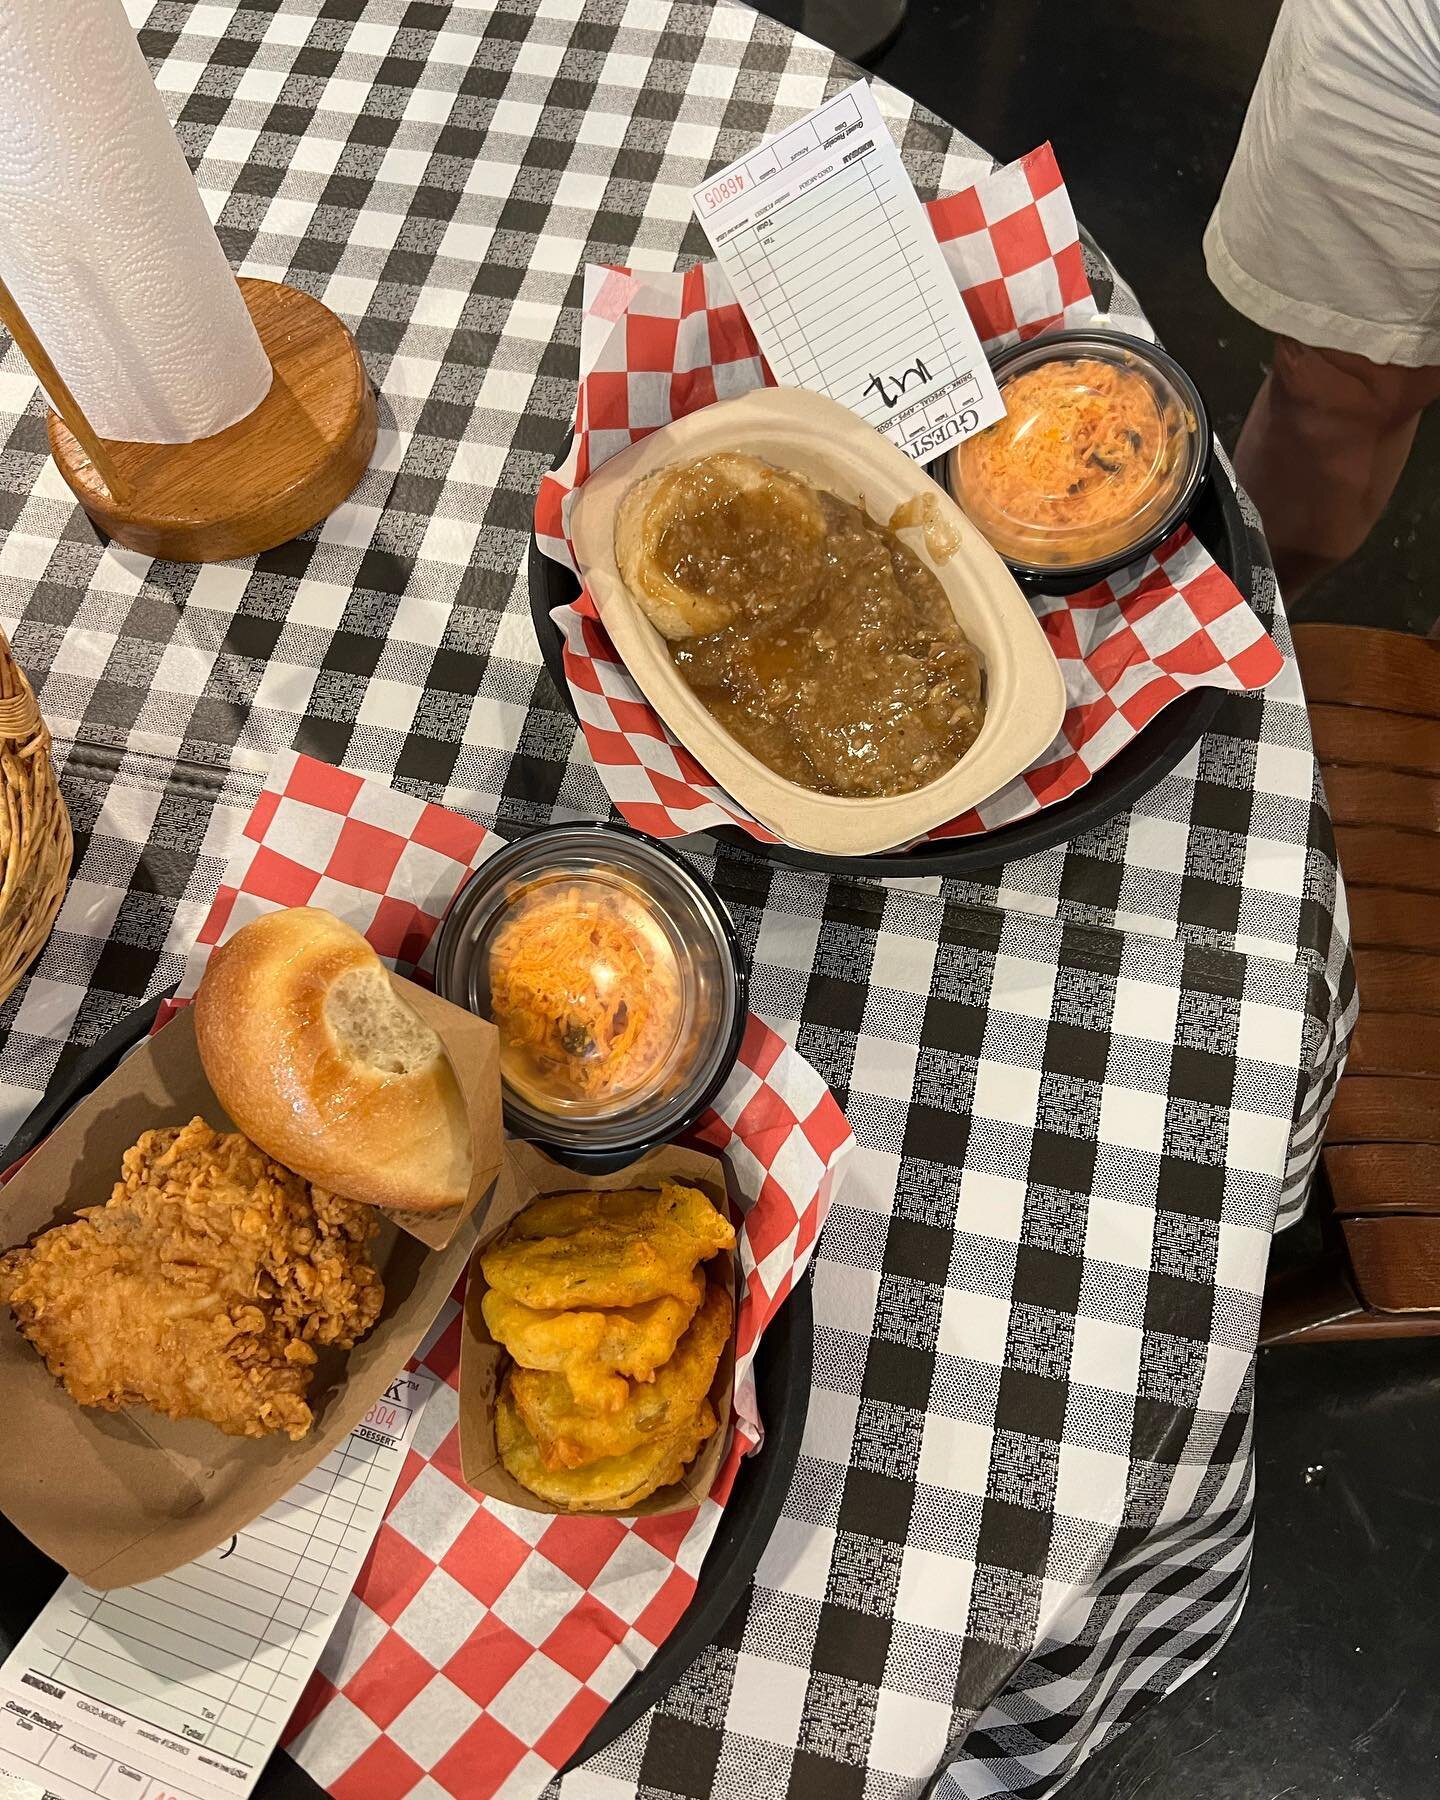 We stuffed our faces at the Irondale Cafe. A classic Meat &amp; 3 and the inspiration for the Whistle Stop Cafe in the film Fried Green Tomatoes. Yes, they serve them, and yes, they were delicious with a spicy homemade remoulade sauce. #roadtripthrou